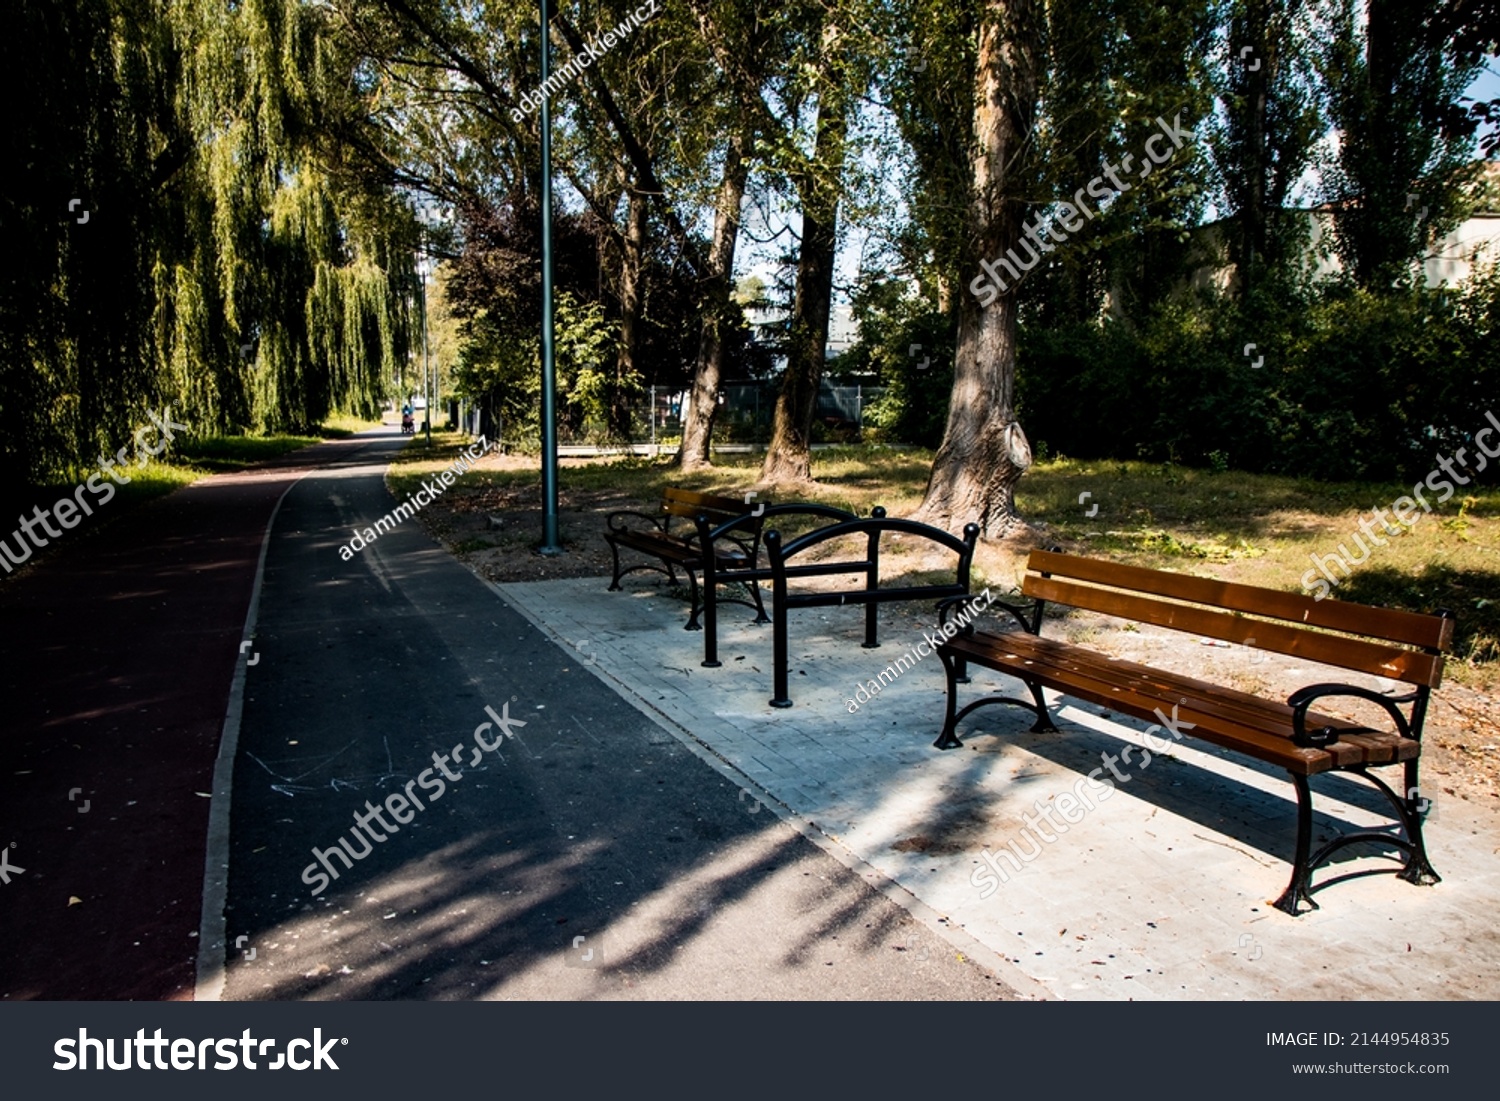 Asphalt footpath and bicycle path surrounded by lawn and trees at the city park #2144954835